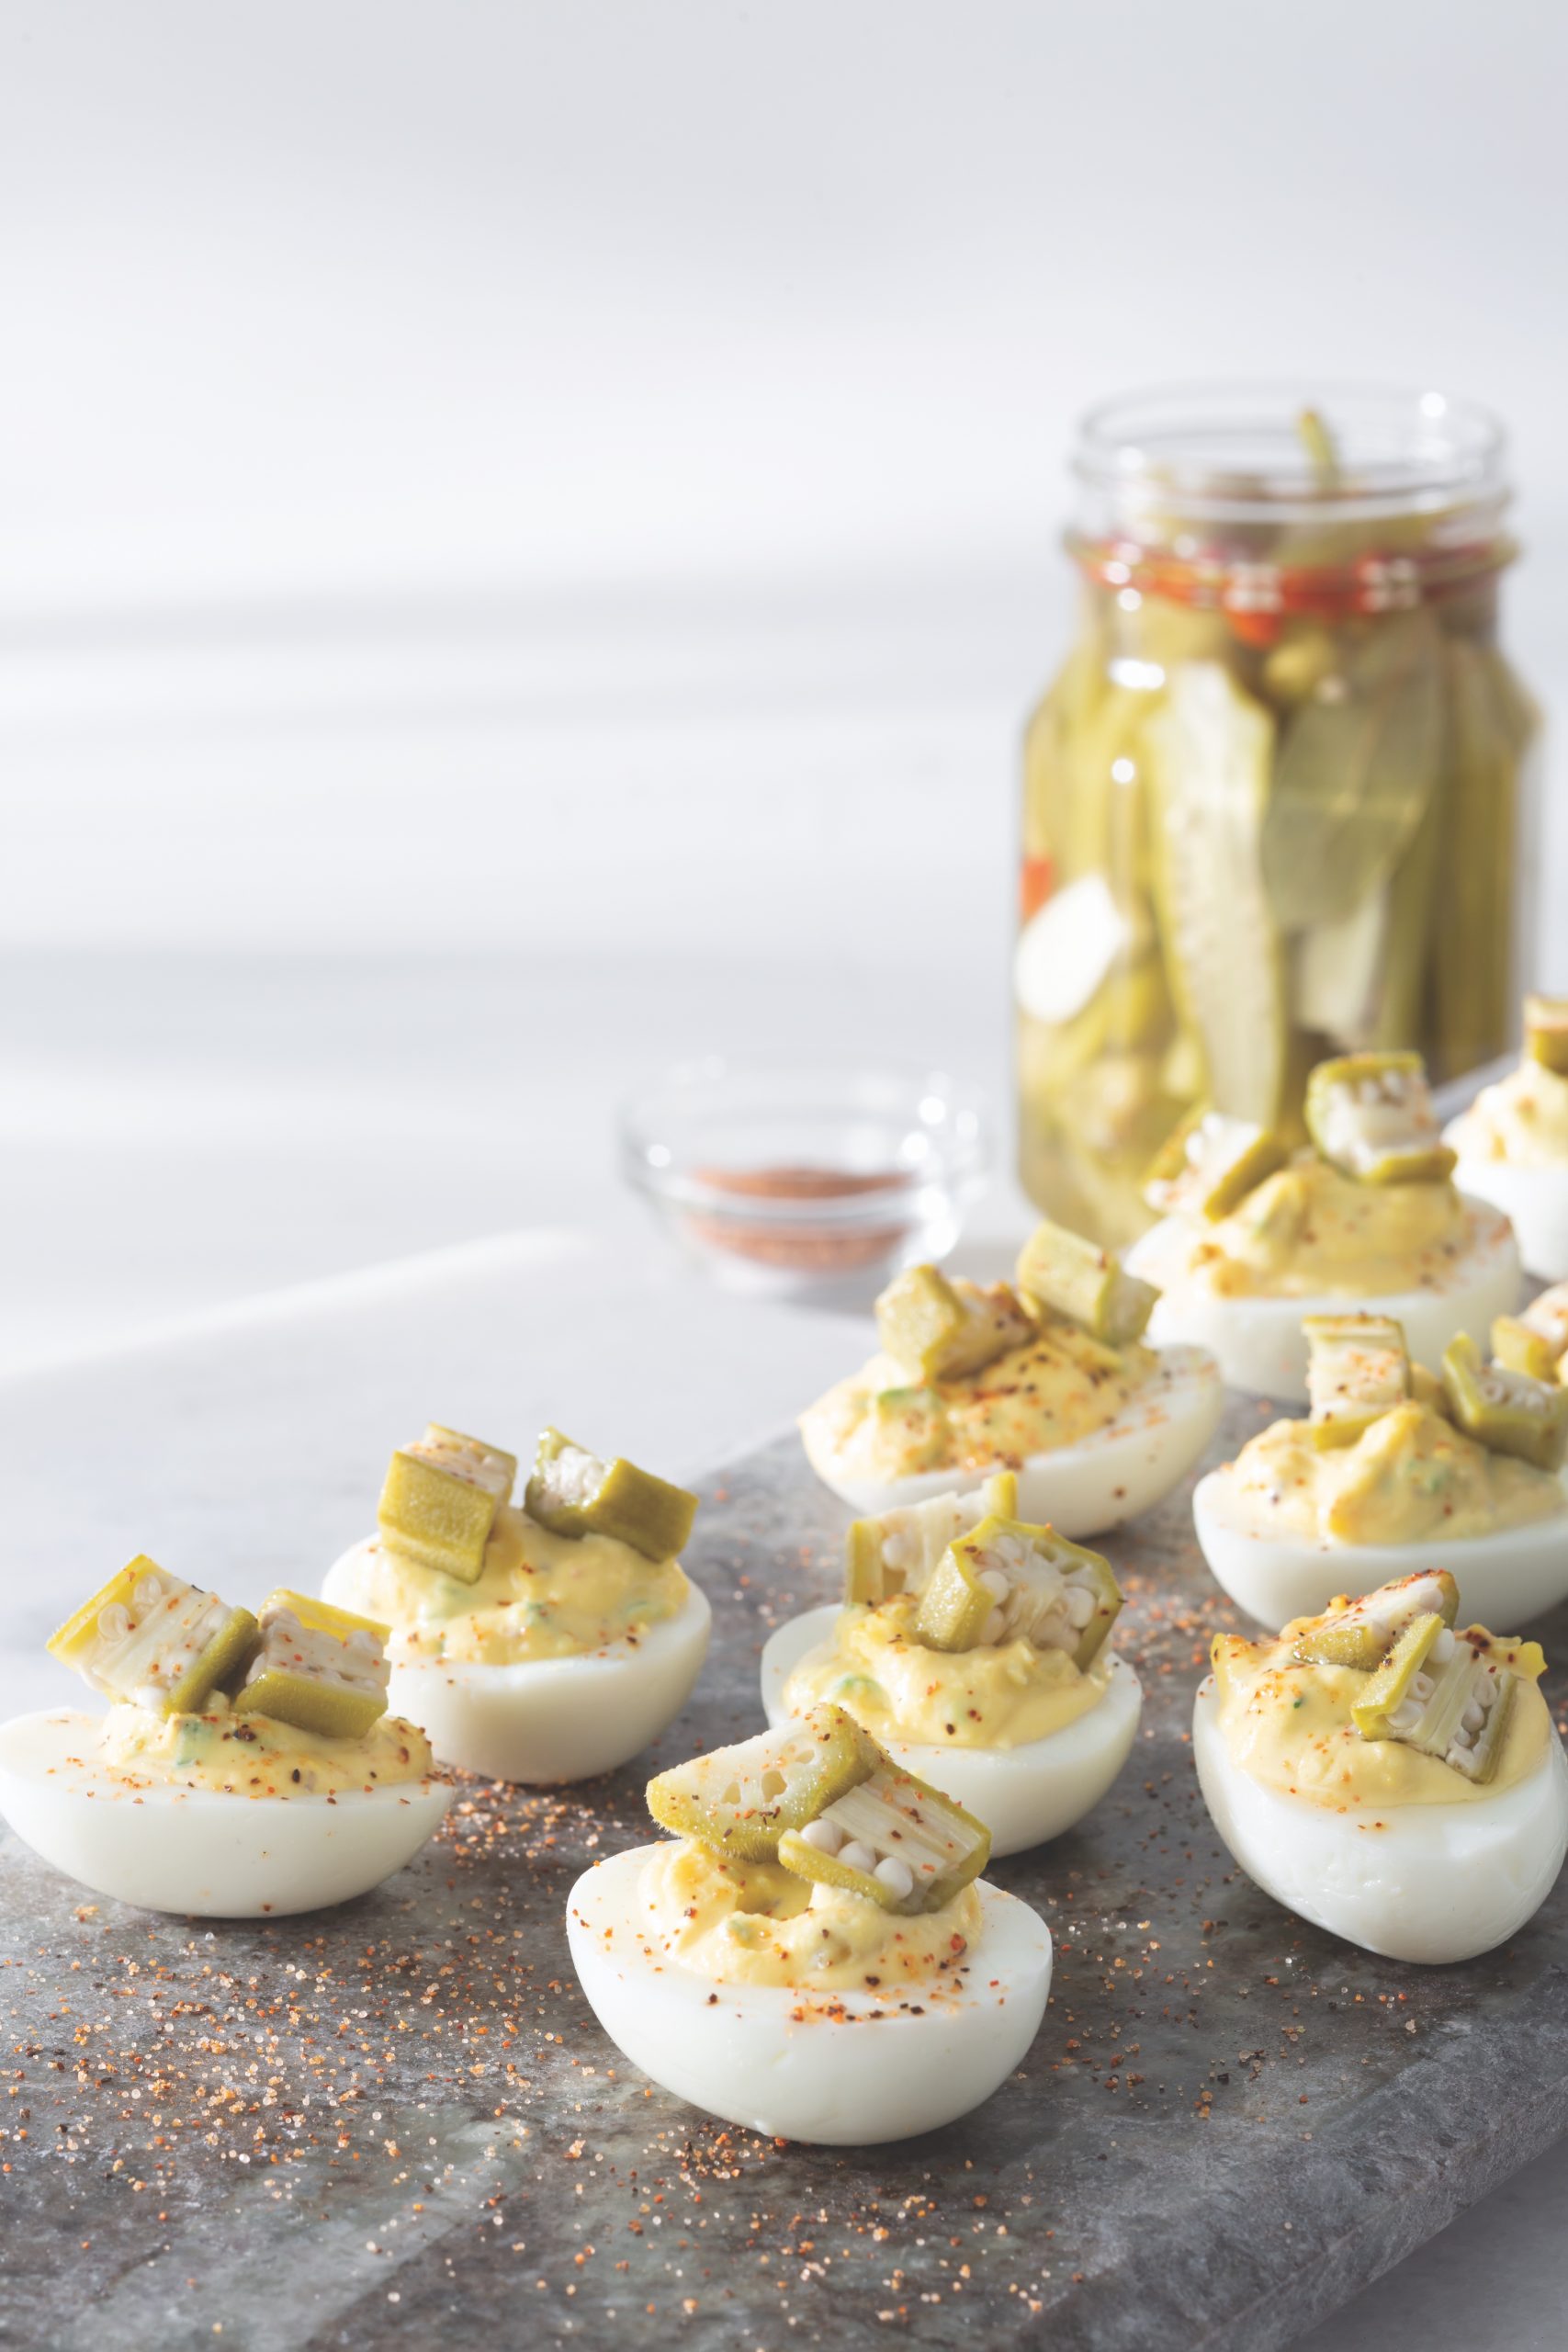 Deviled Eggs with Quick-Pickled Okra